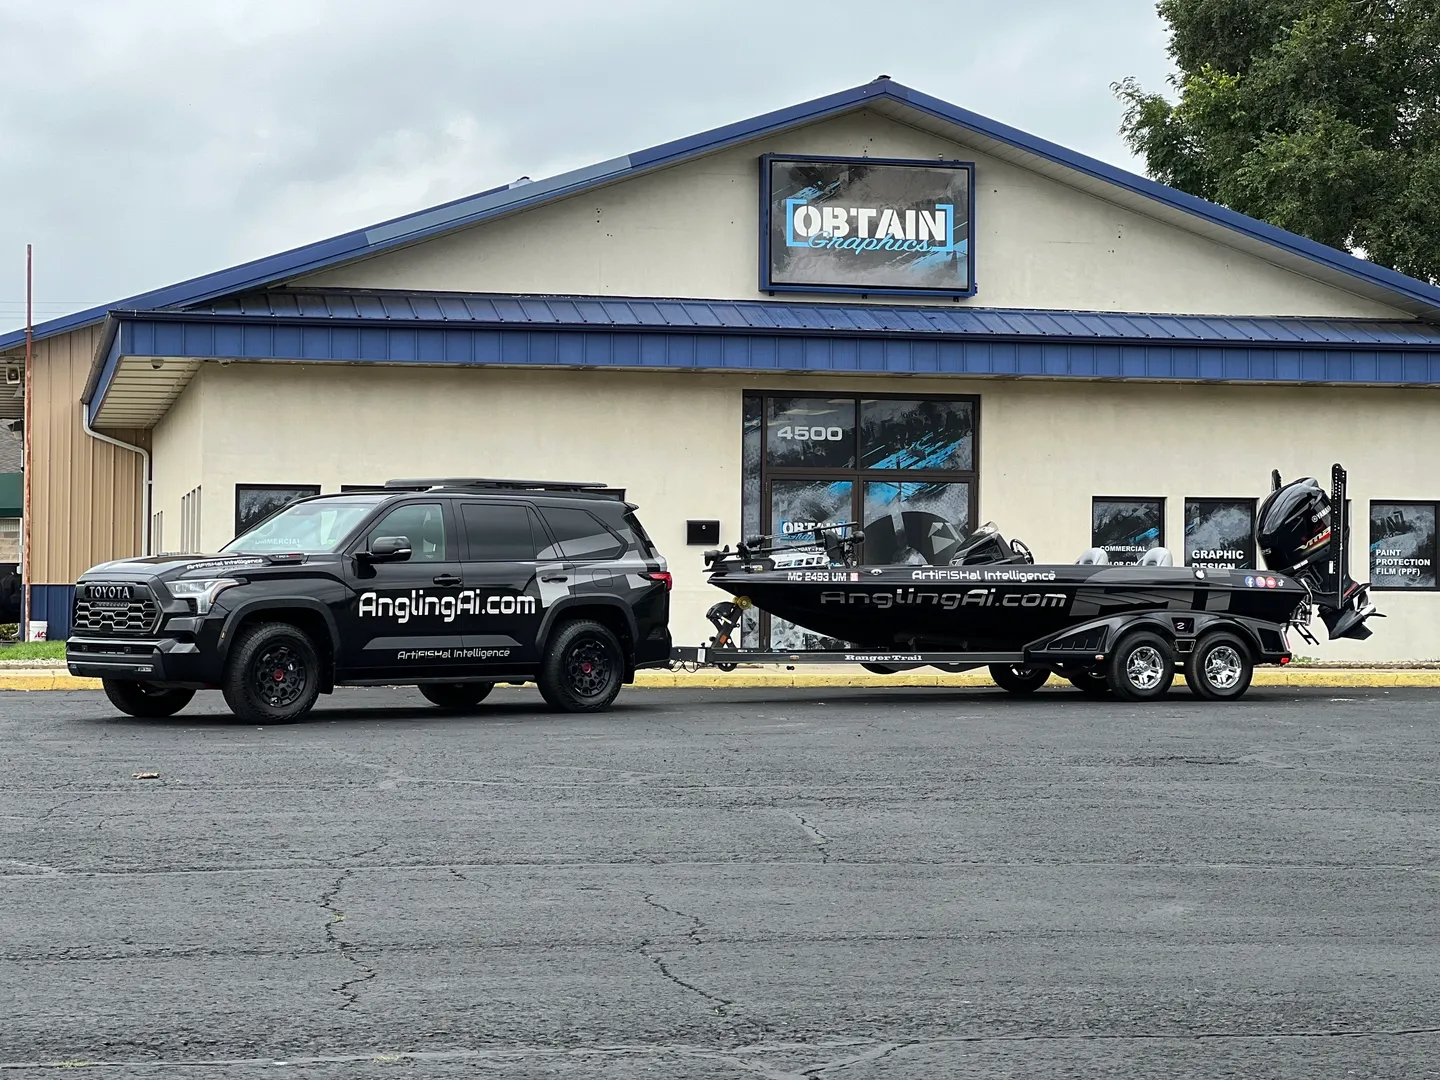 A boat is parked in front of the store.